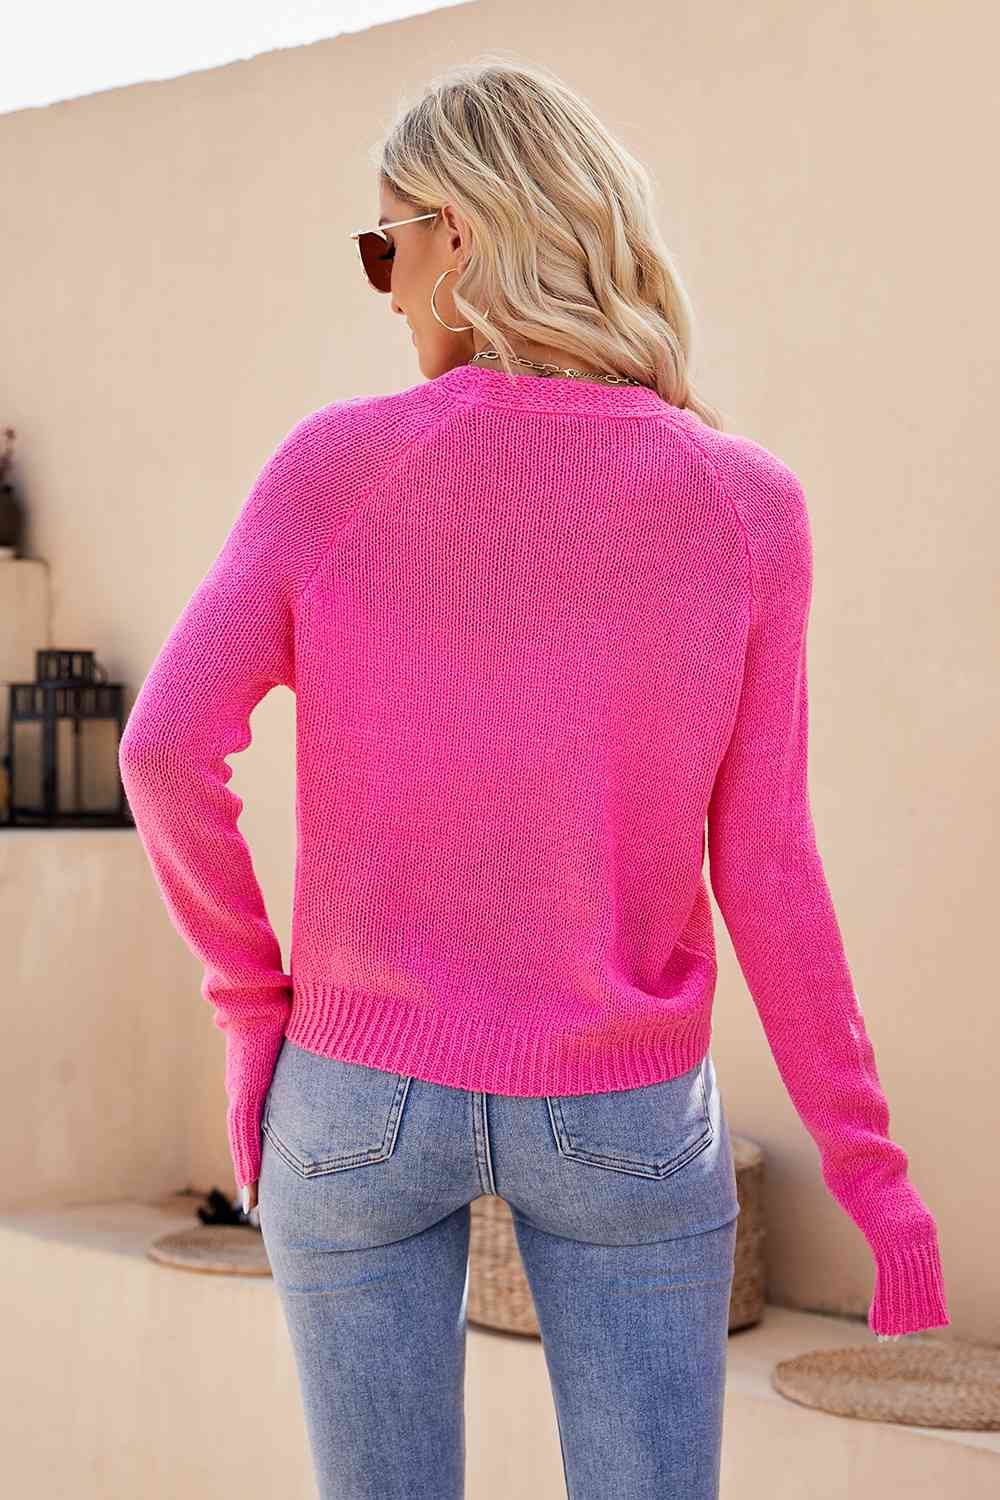 Neon Lights Cardigan - Cheeky Chic Boutique